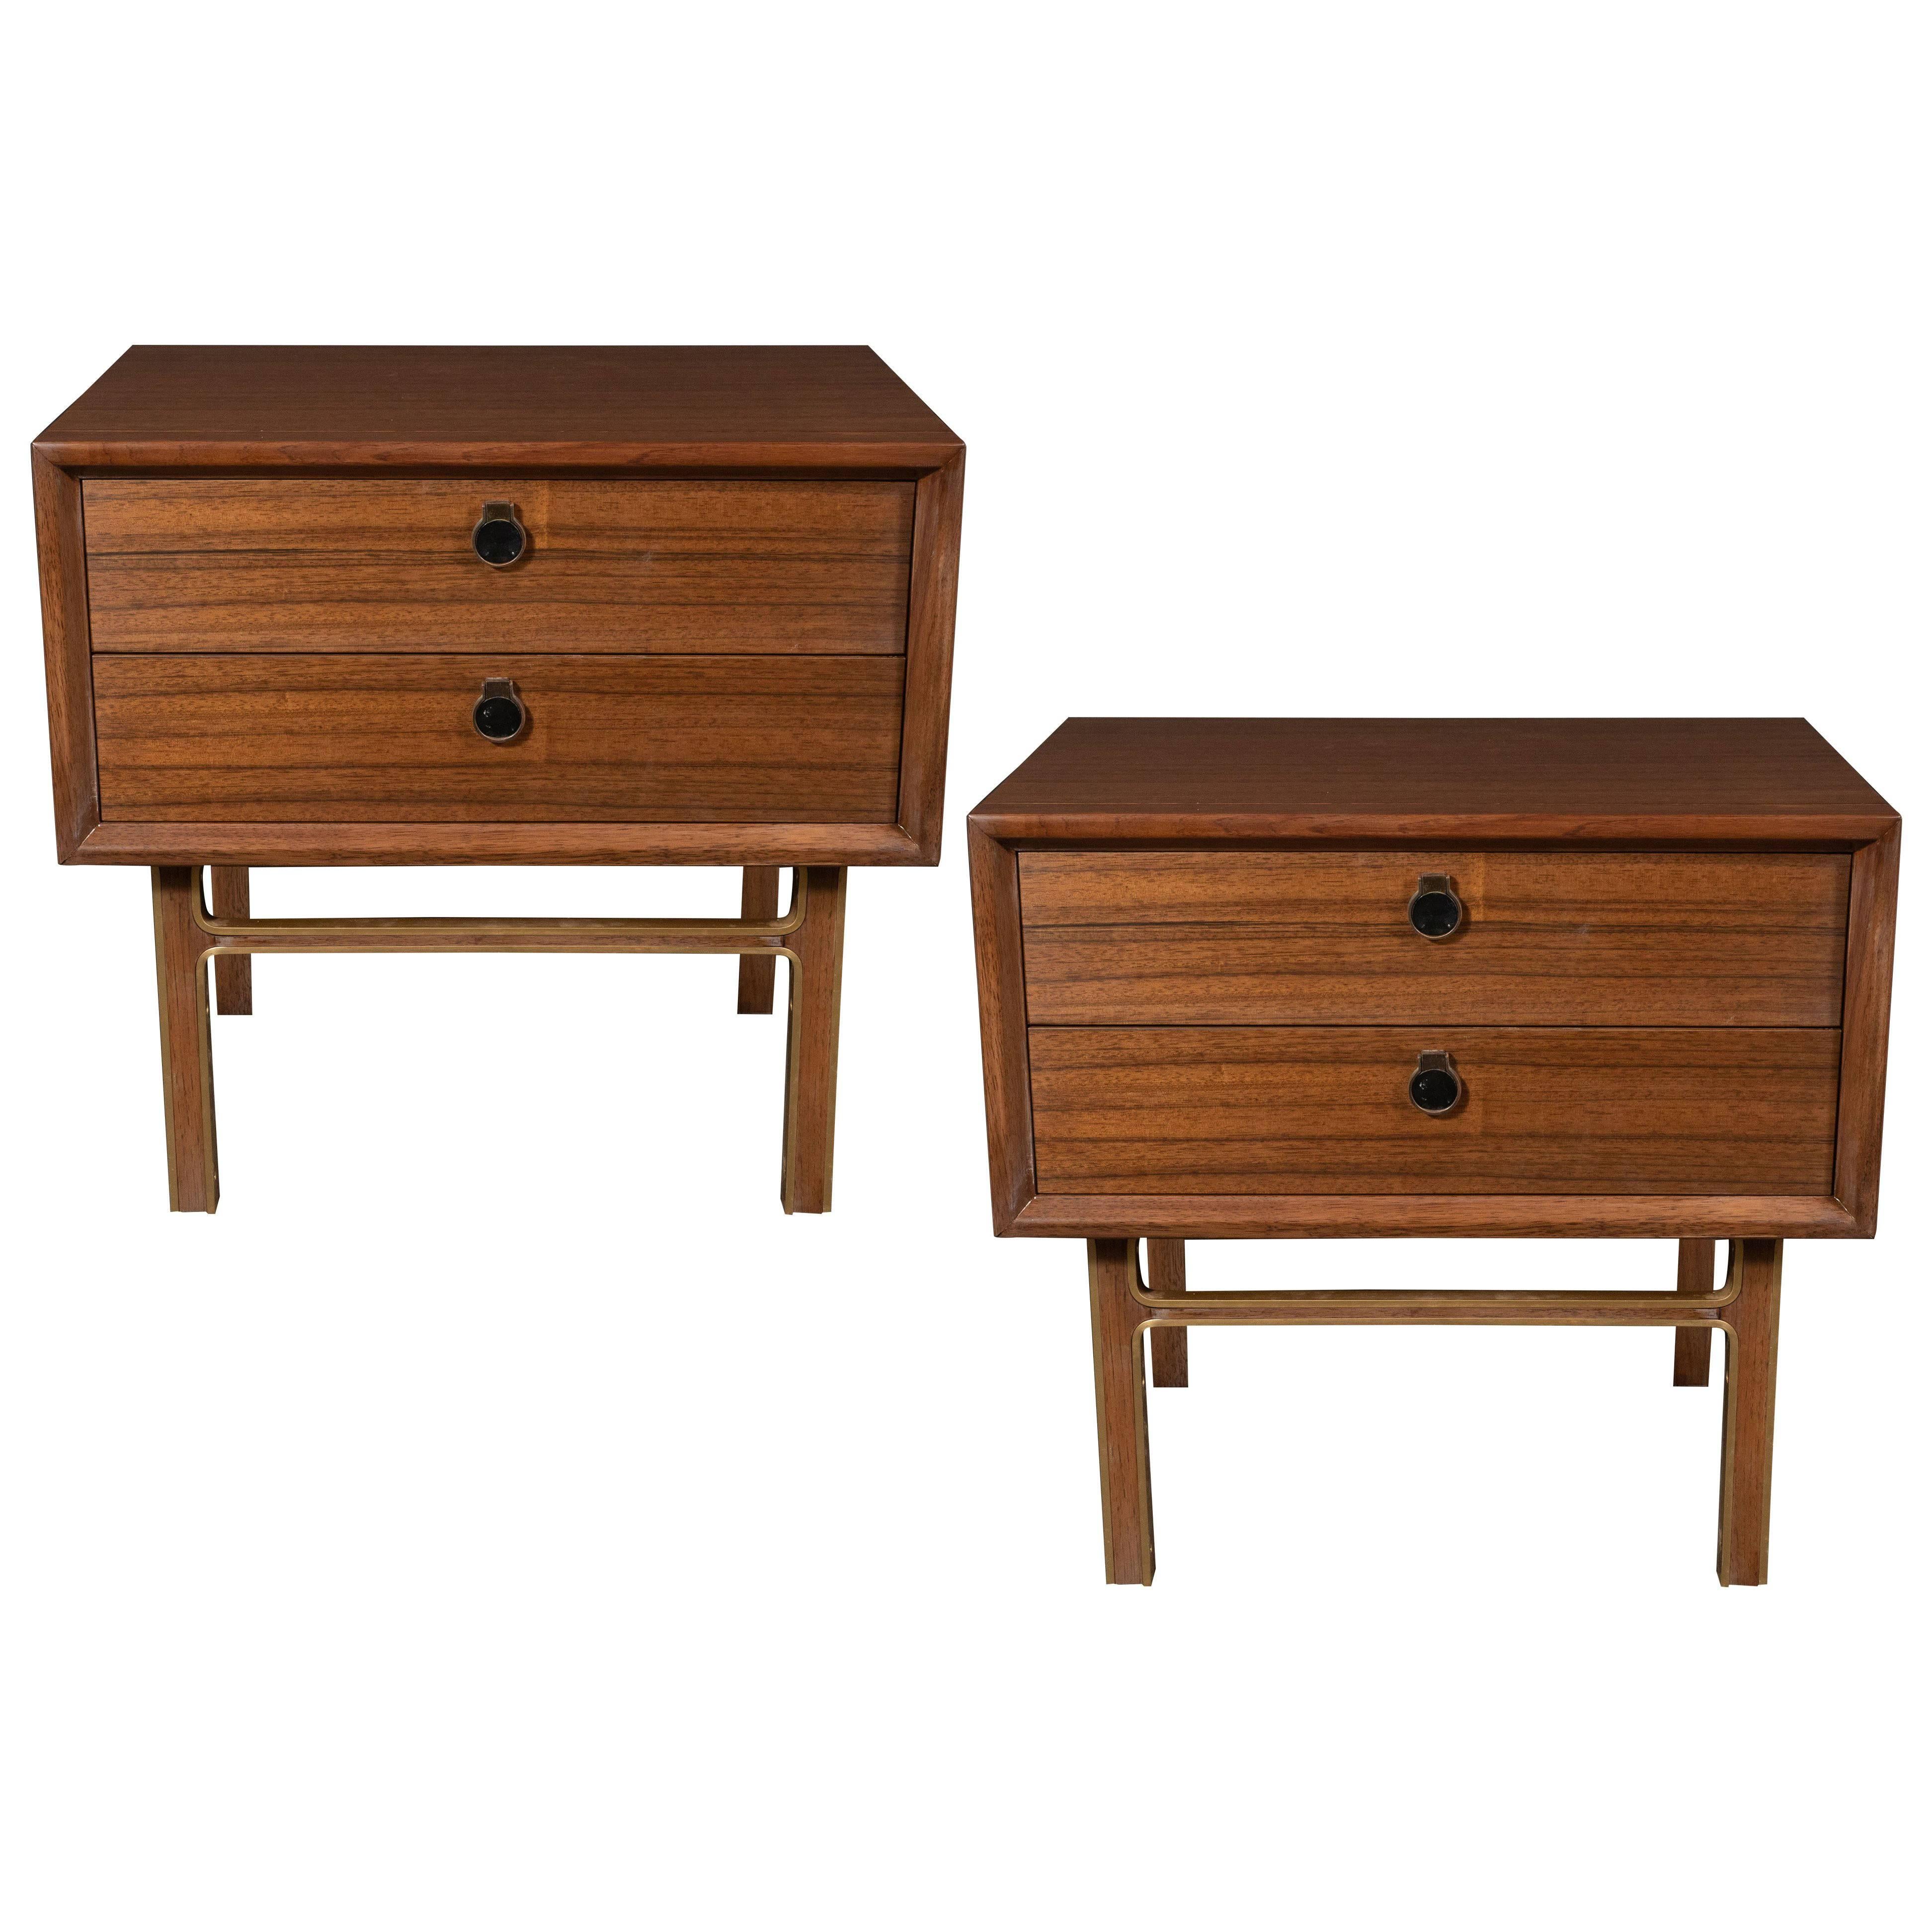 Pair of Mid-Century Modern Bookmatched Walnut Nightstands with Brass Pulls